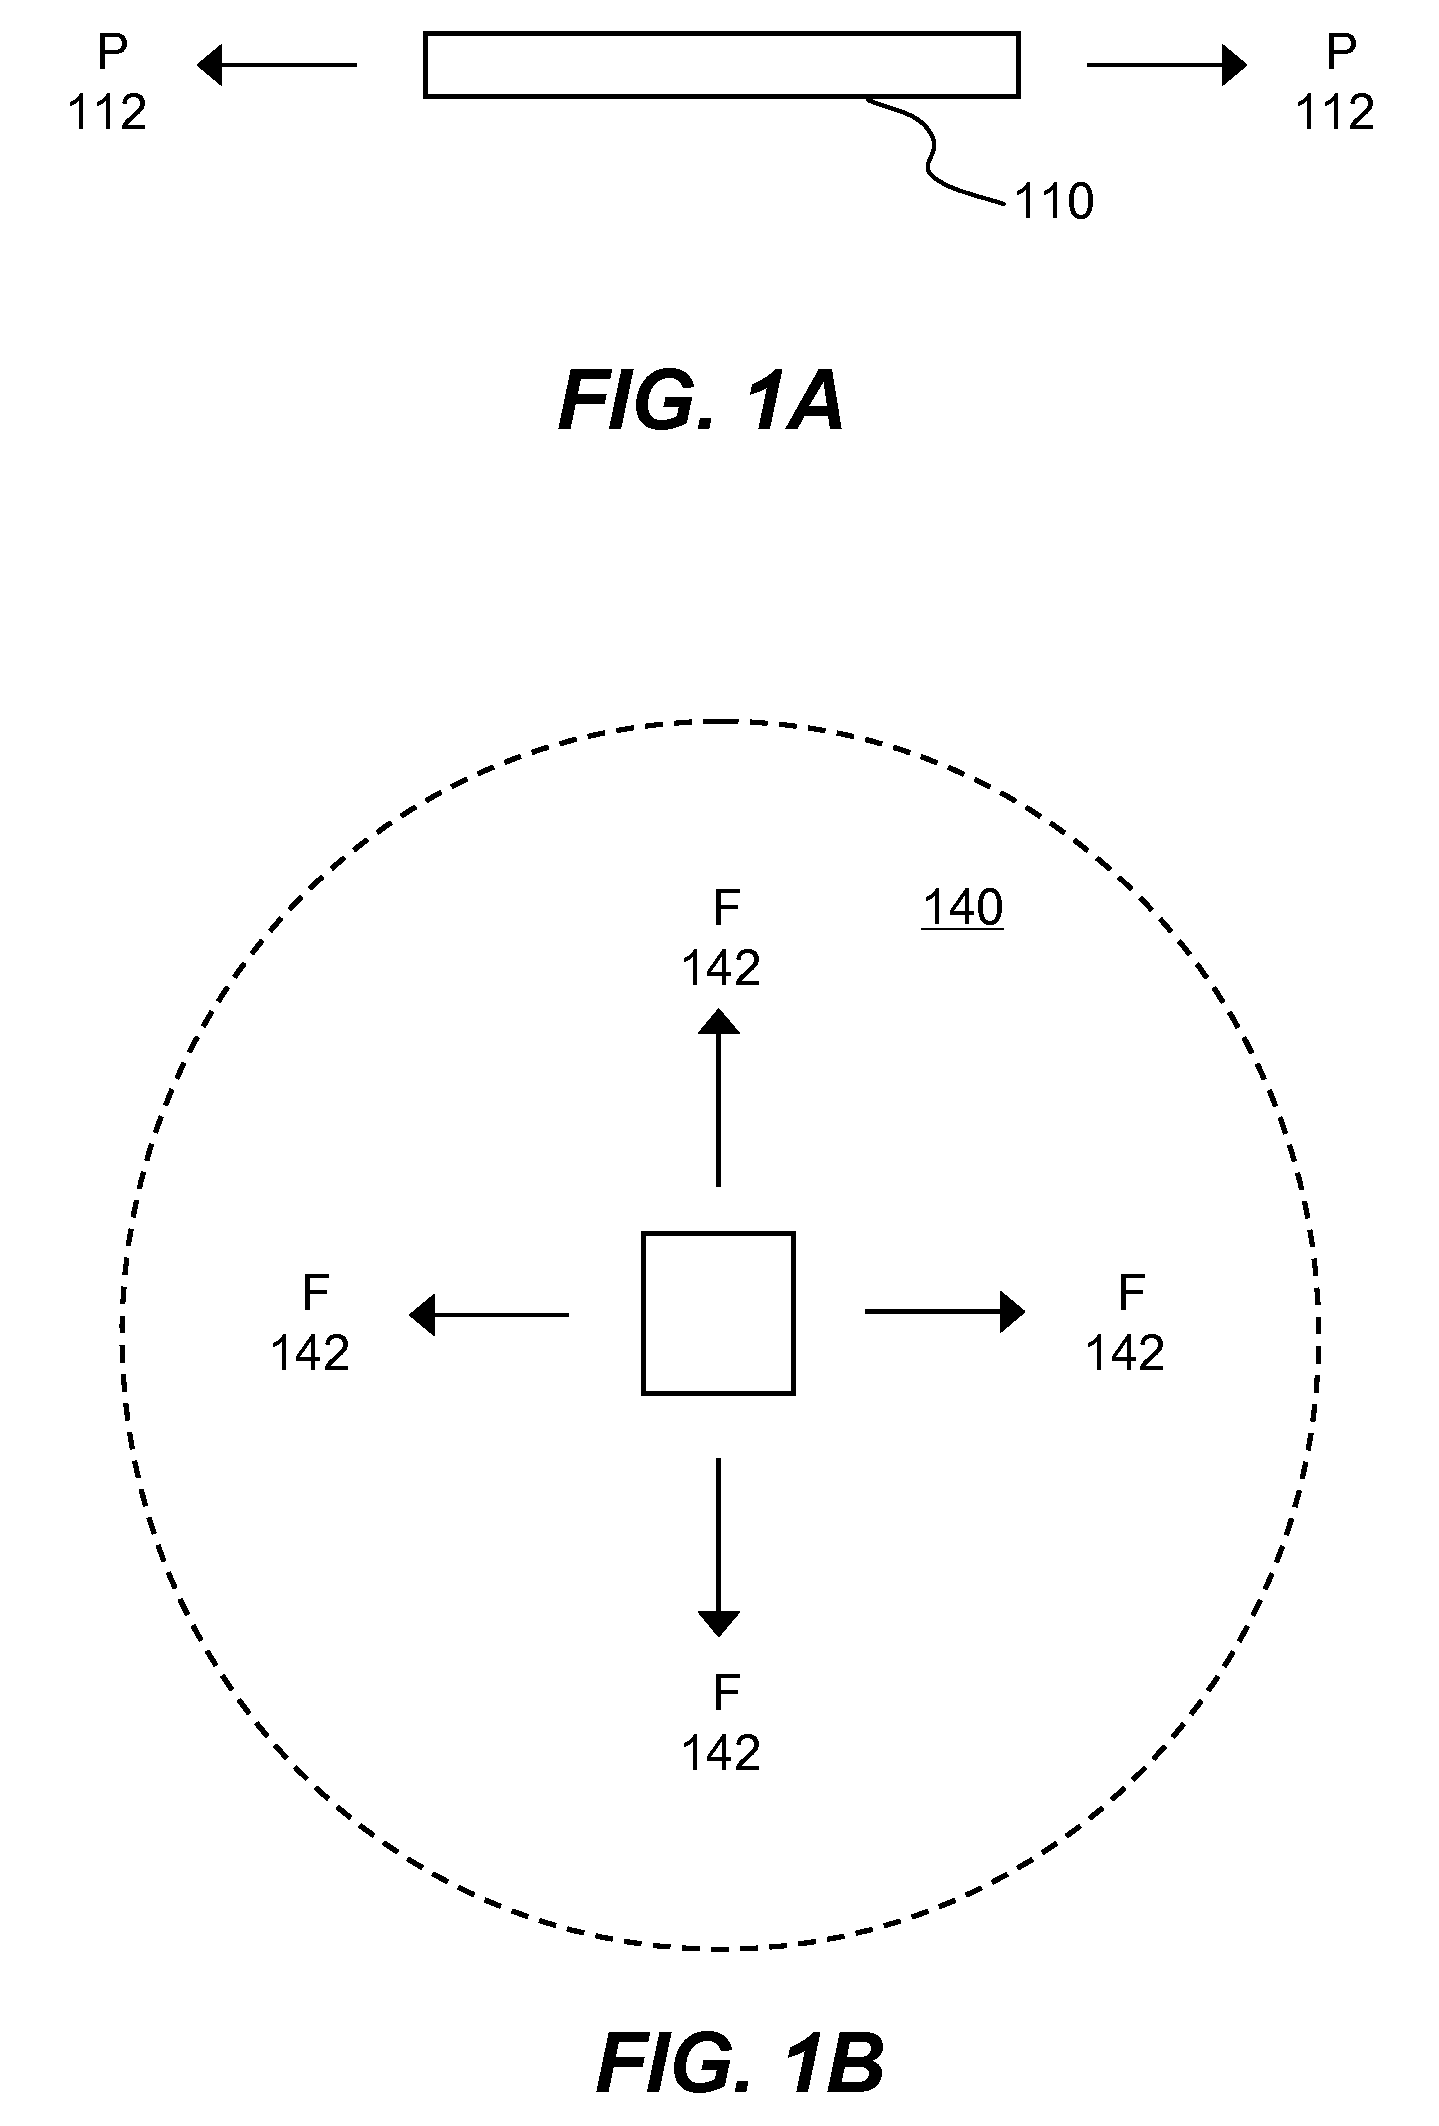 Methods and systems for enabling simulation of aging effect of a chrono-rheological material in computer aided engineering analysis